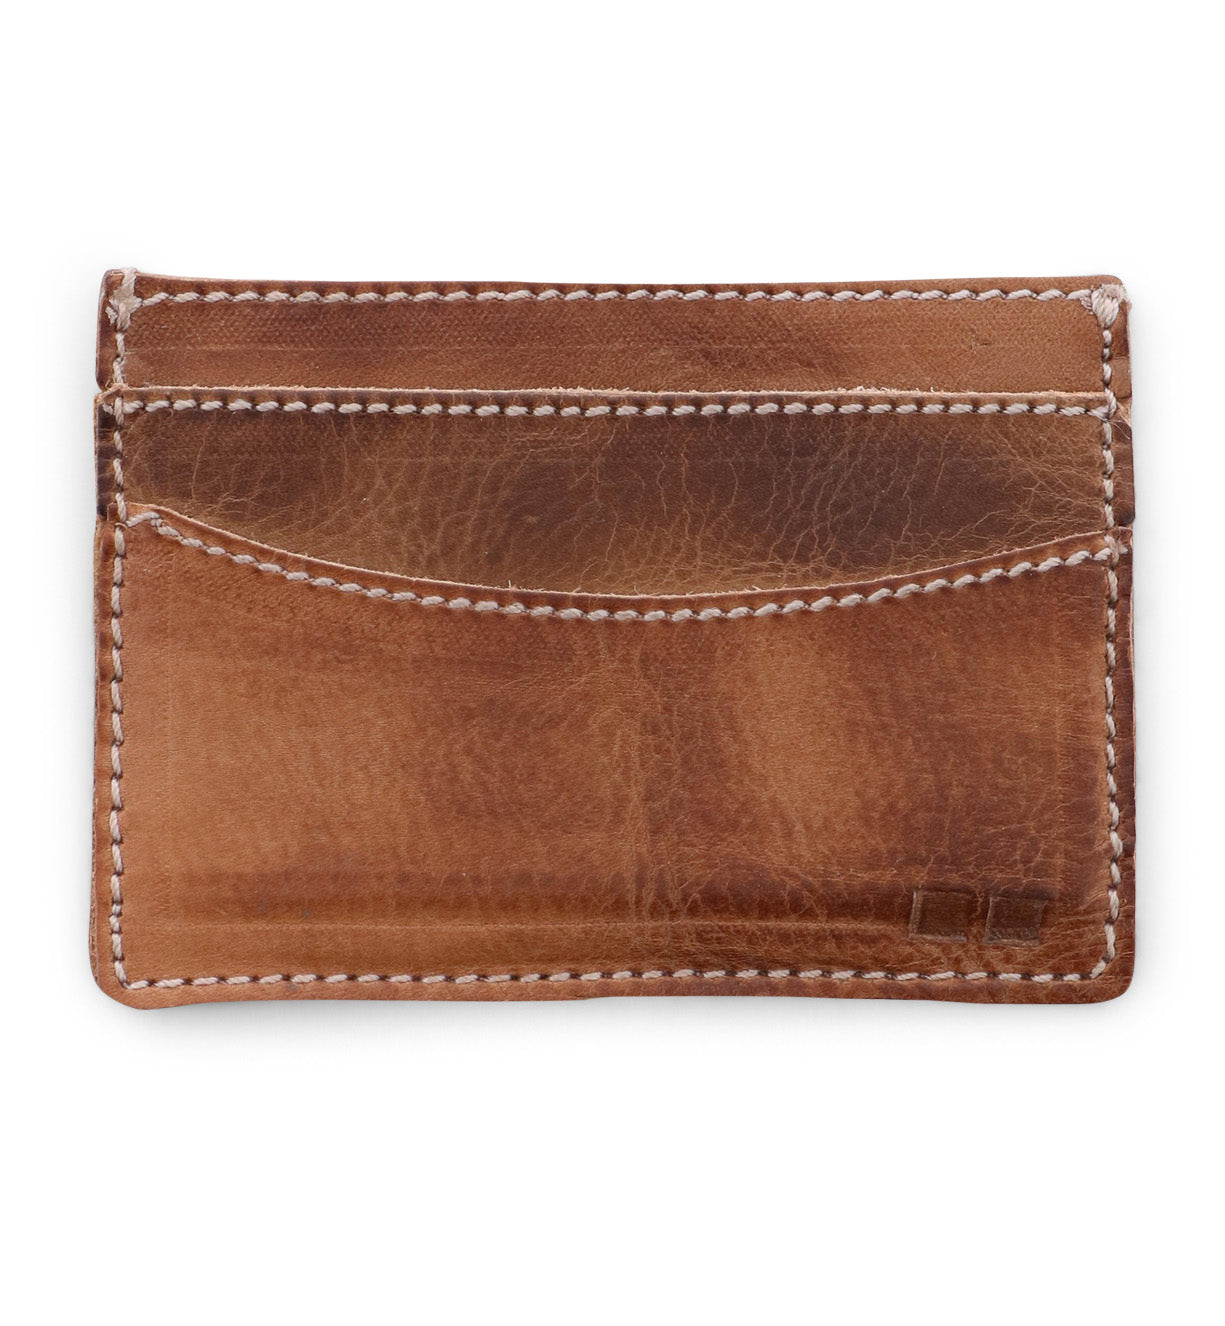 A Chuck card holder by Bed Stu, made of tan leather, on a white background.